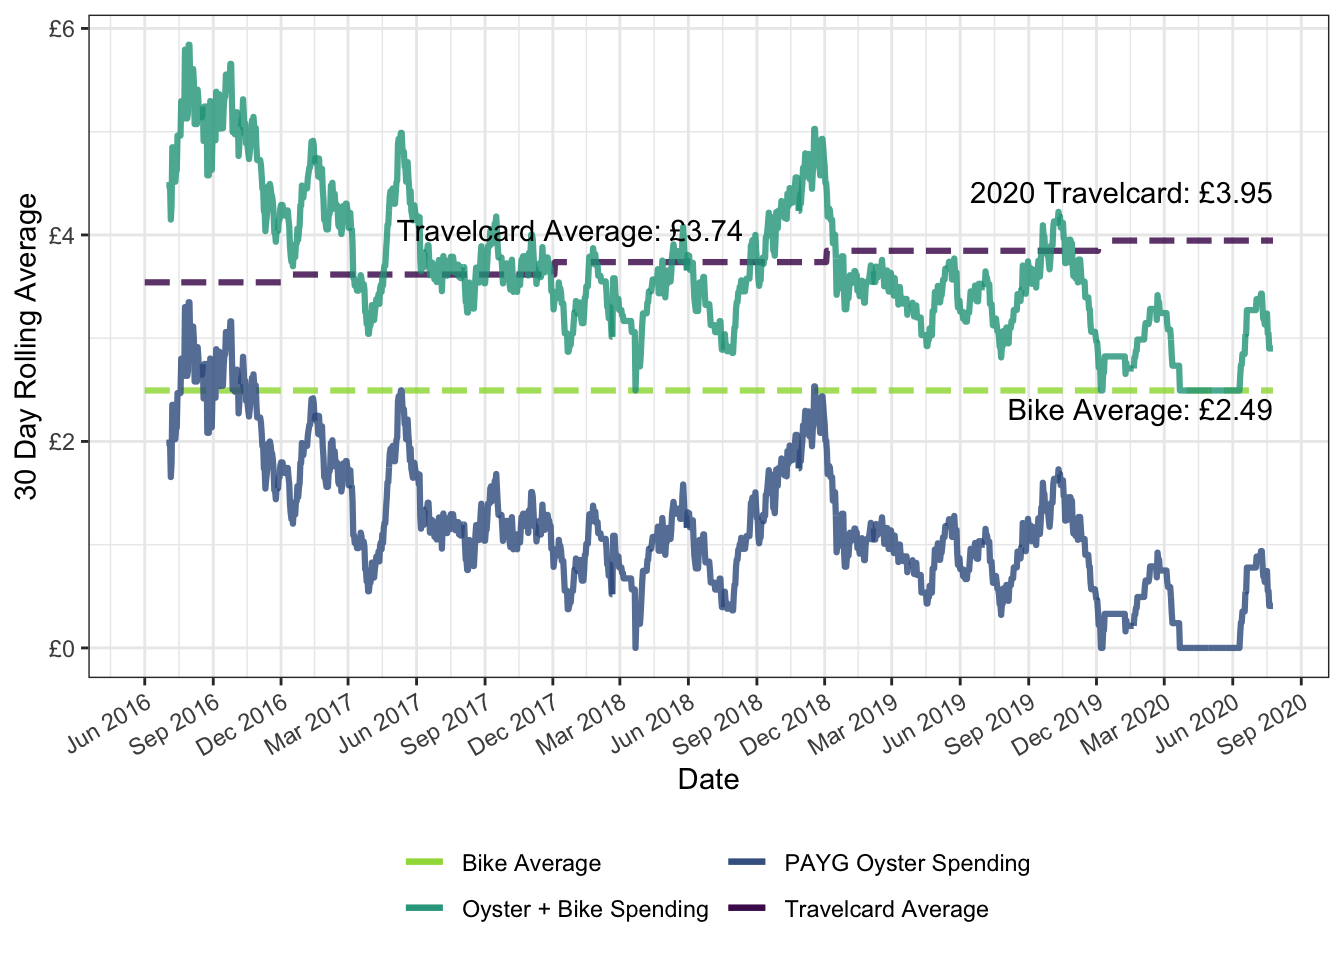 Time series of spending on pay-as-you-go Oyster and cycling, annual travel card